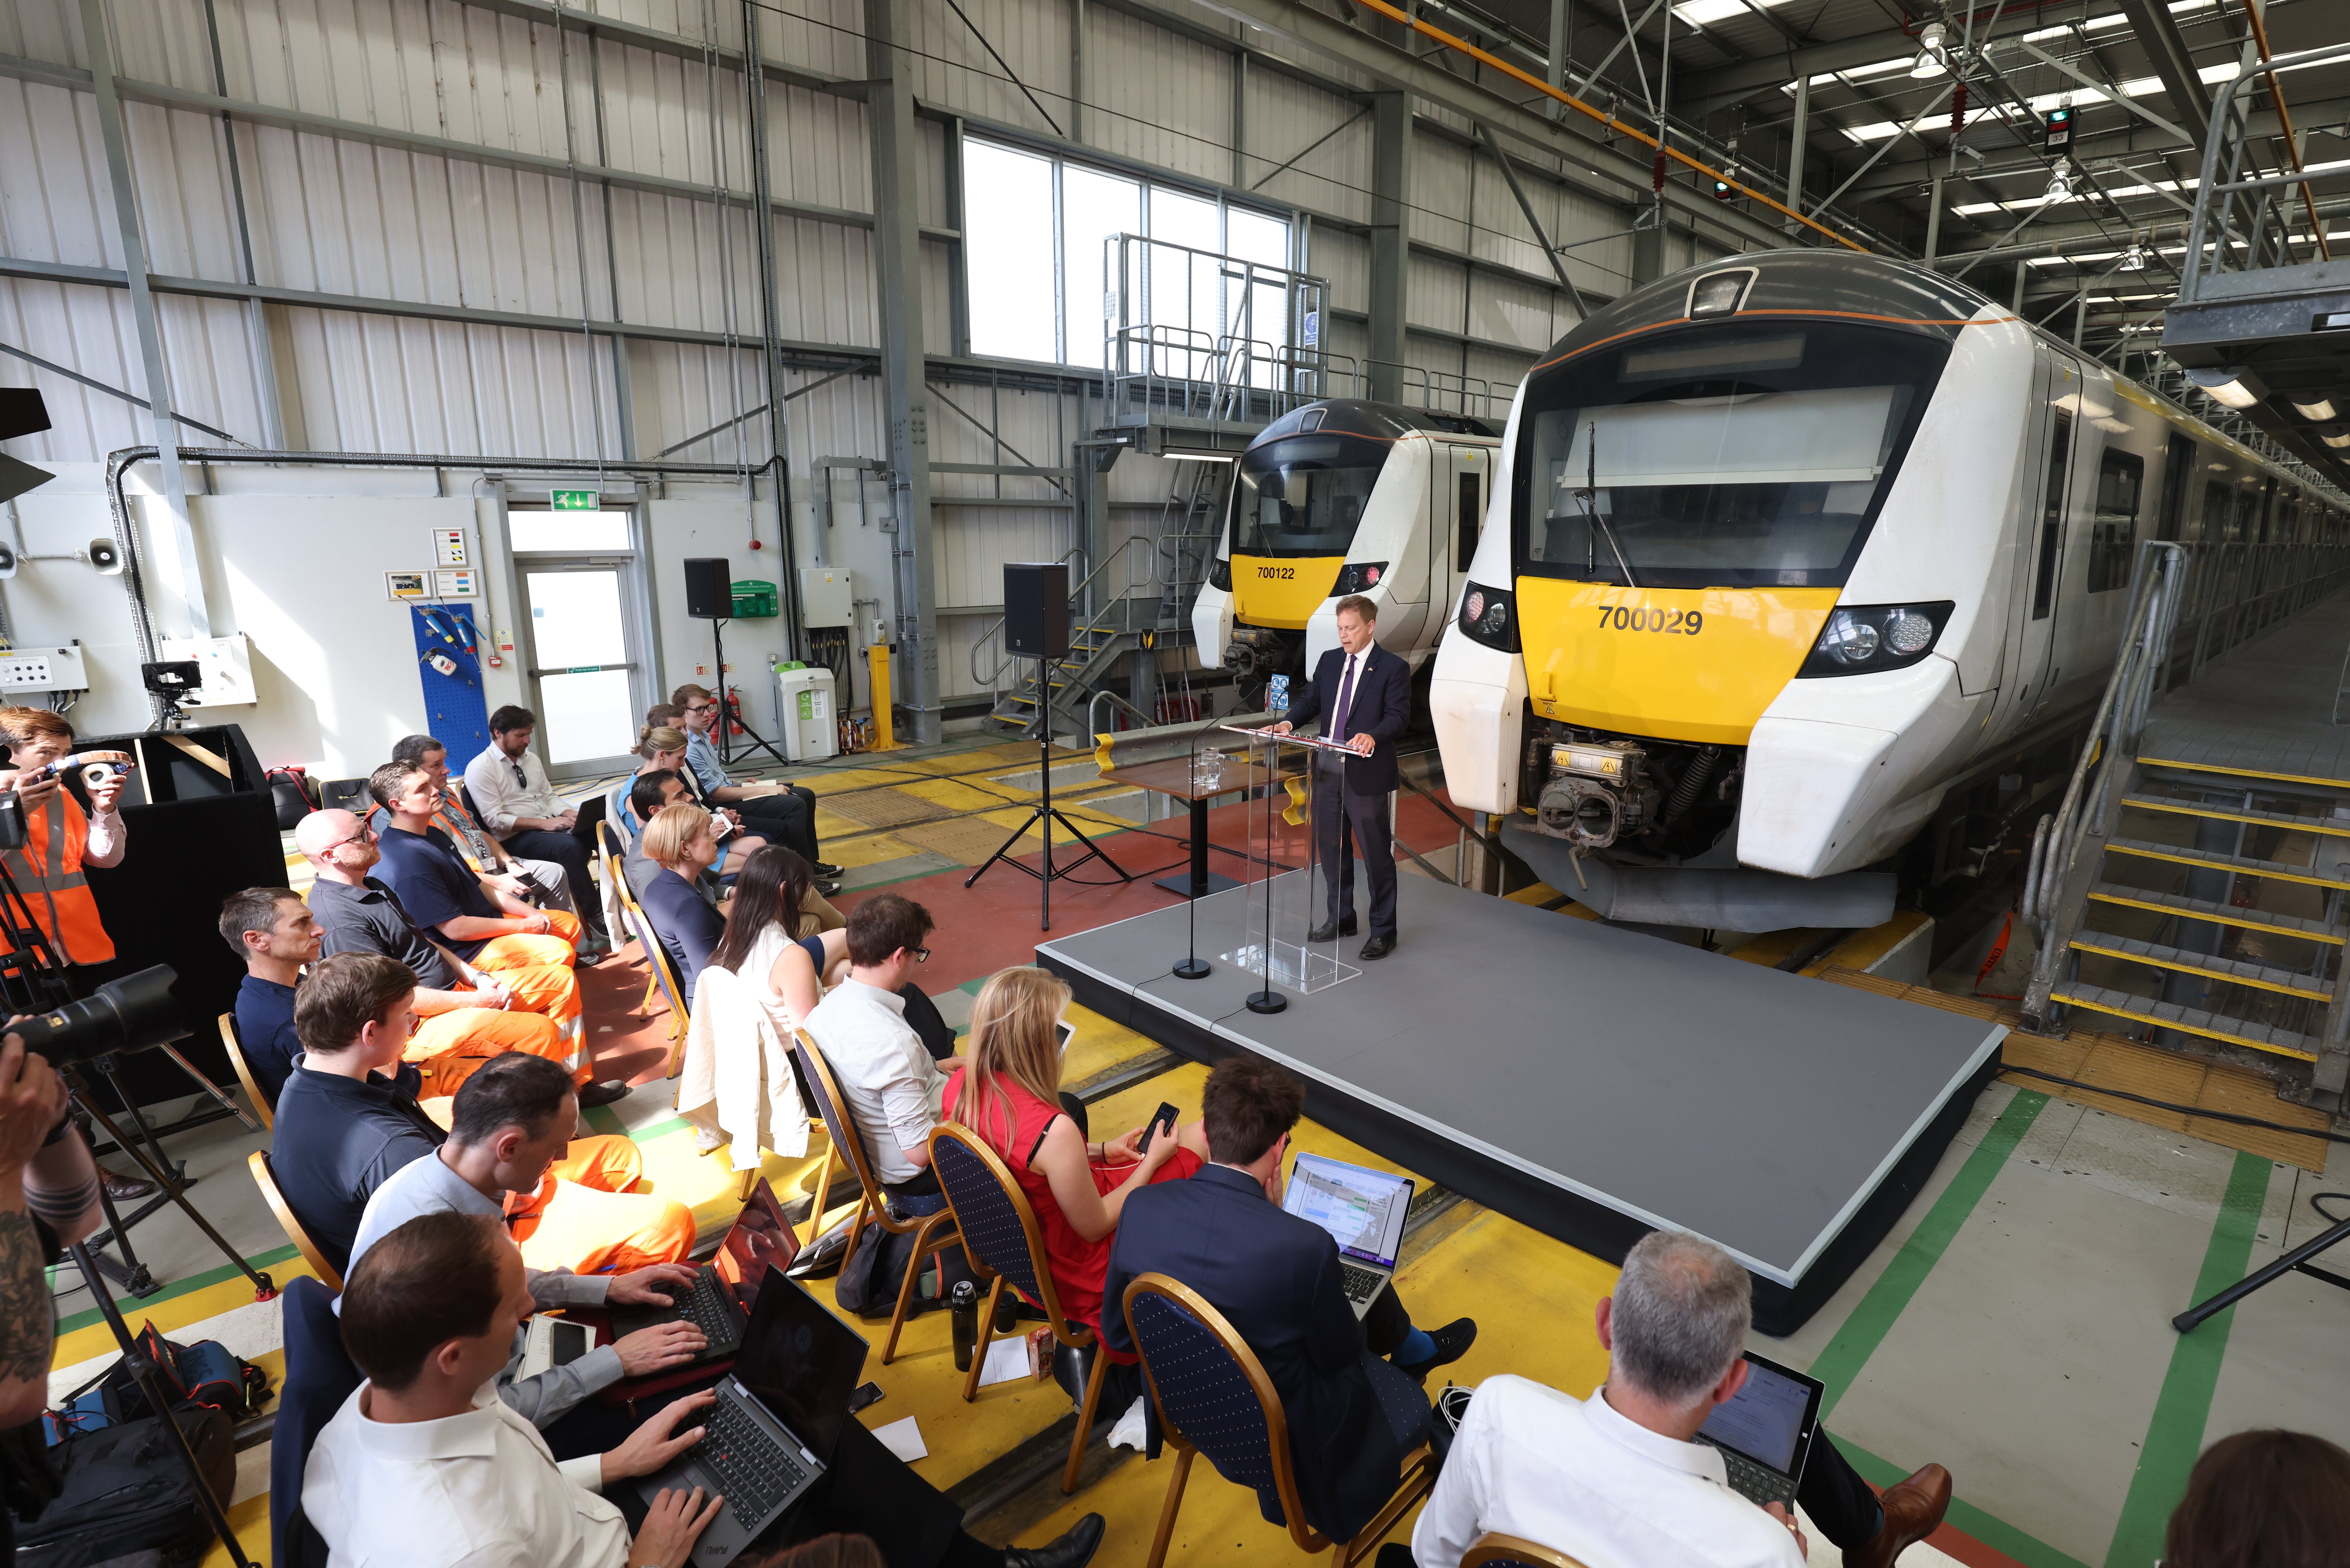 Grant Shapps was speaking at a train depot in north London (PA)